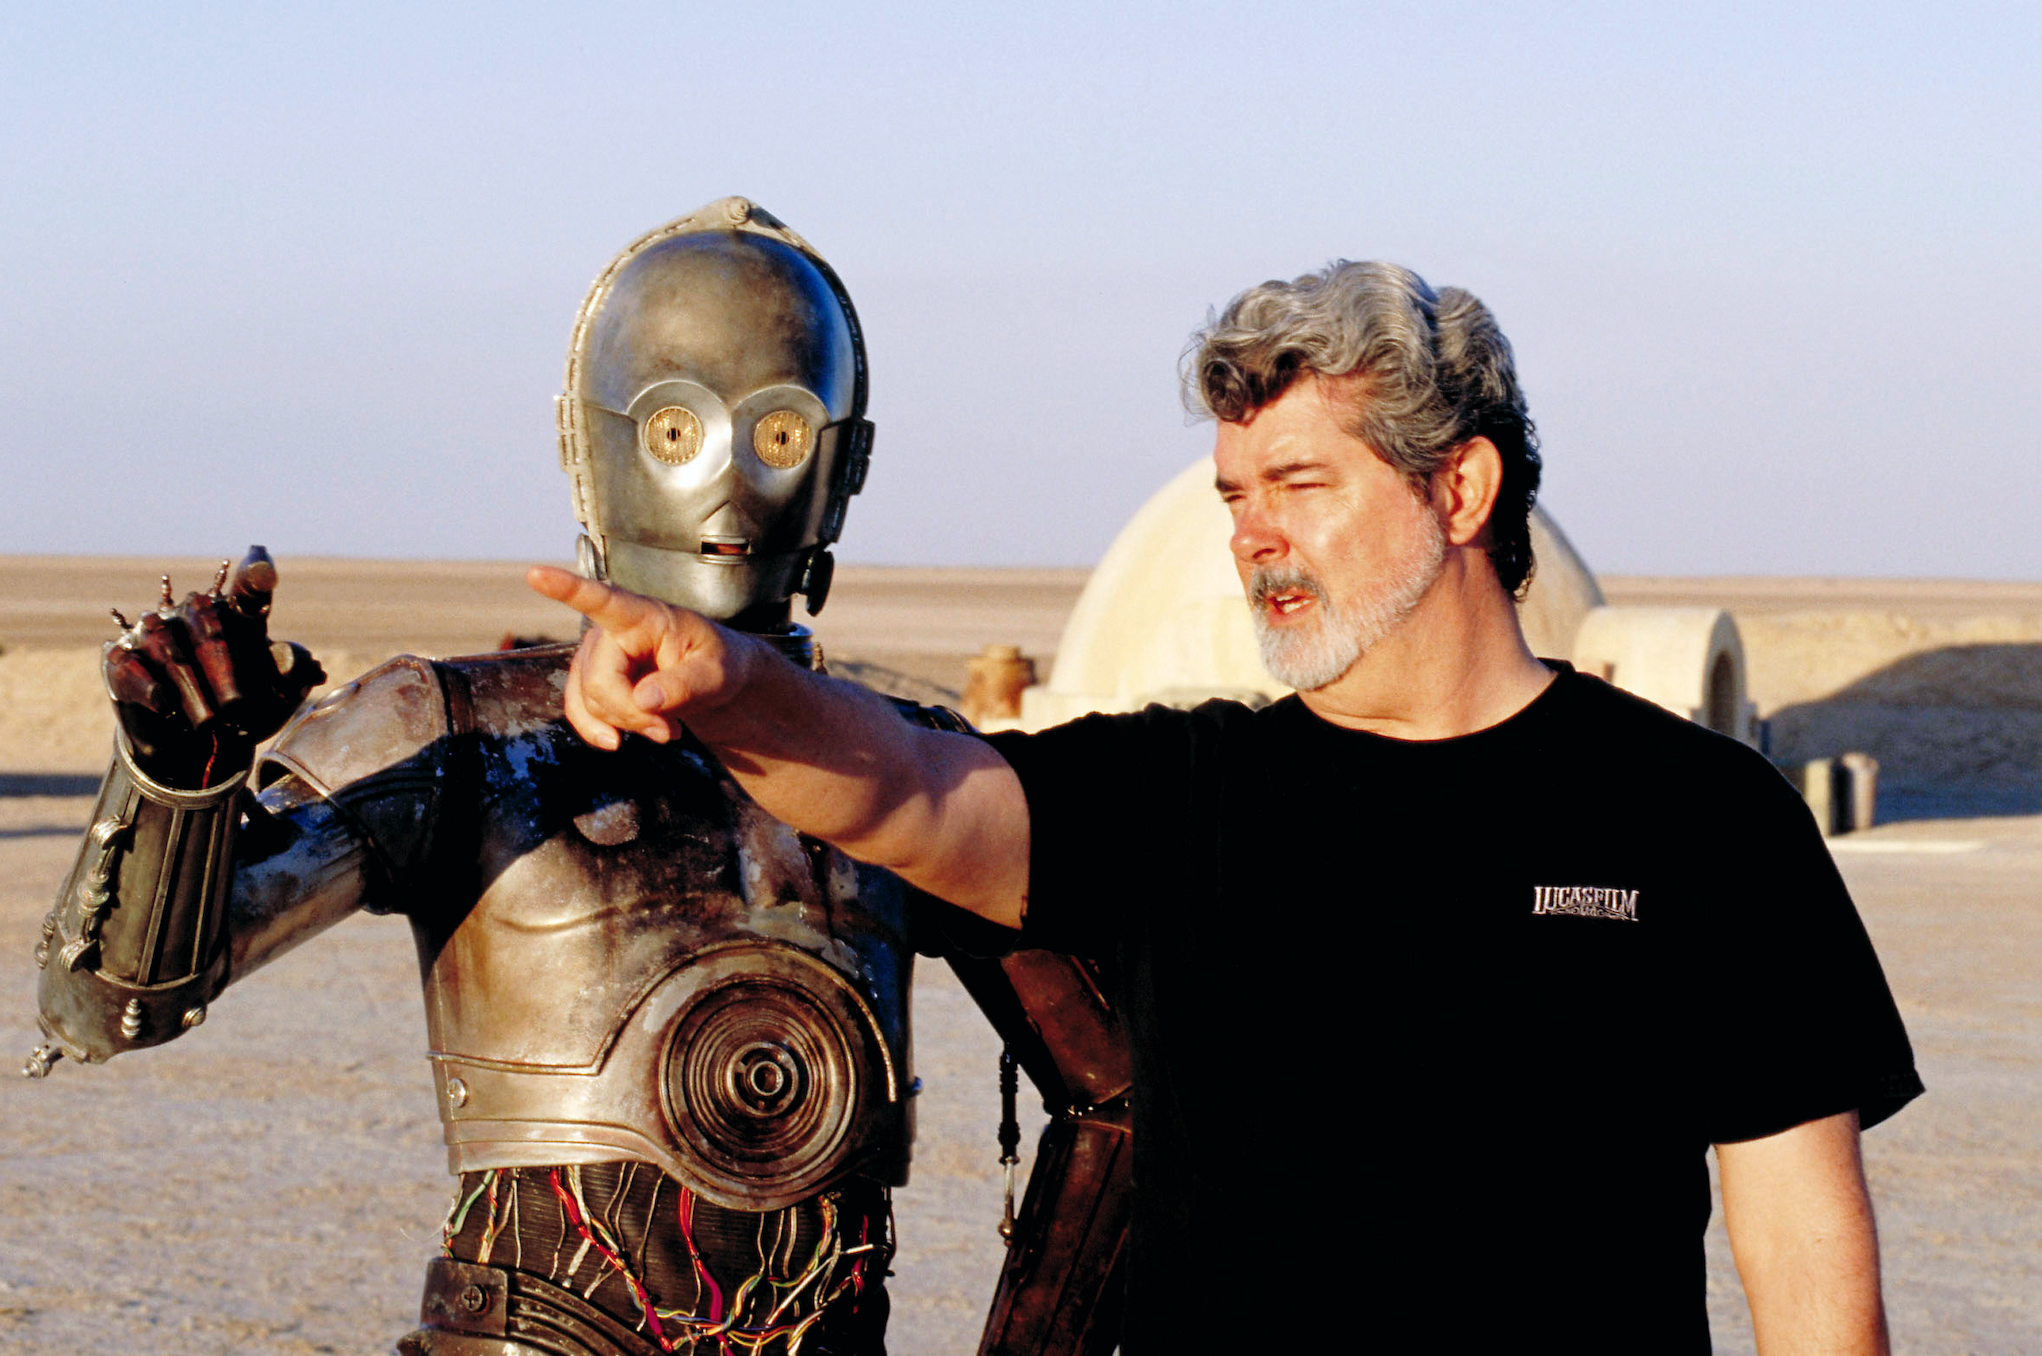 George Lucas on the set of Star Wars Episode IV: A New Hope